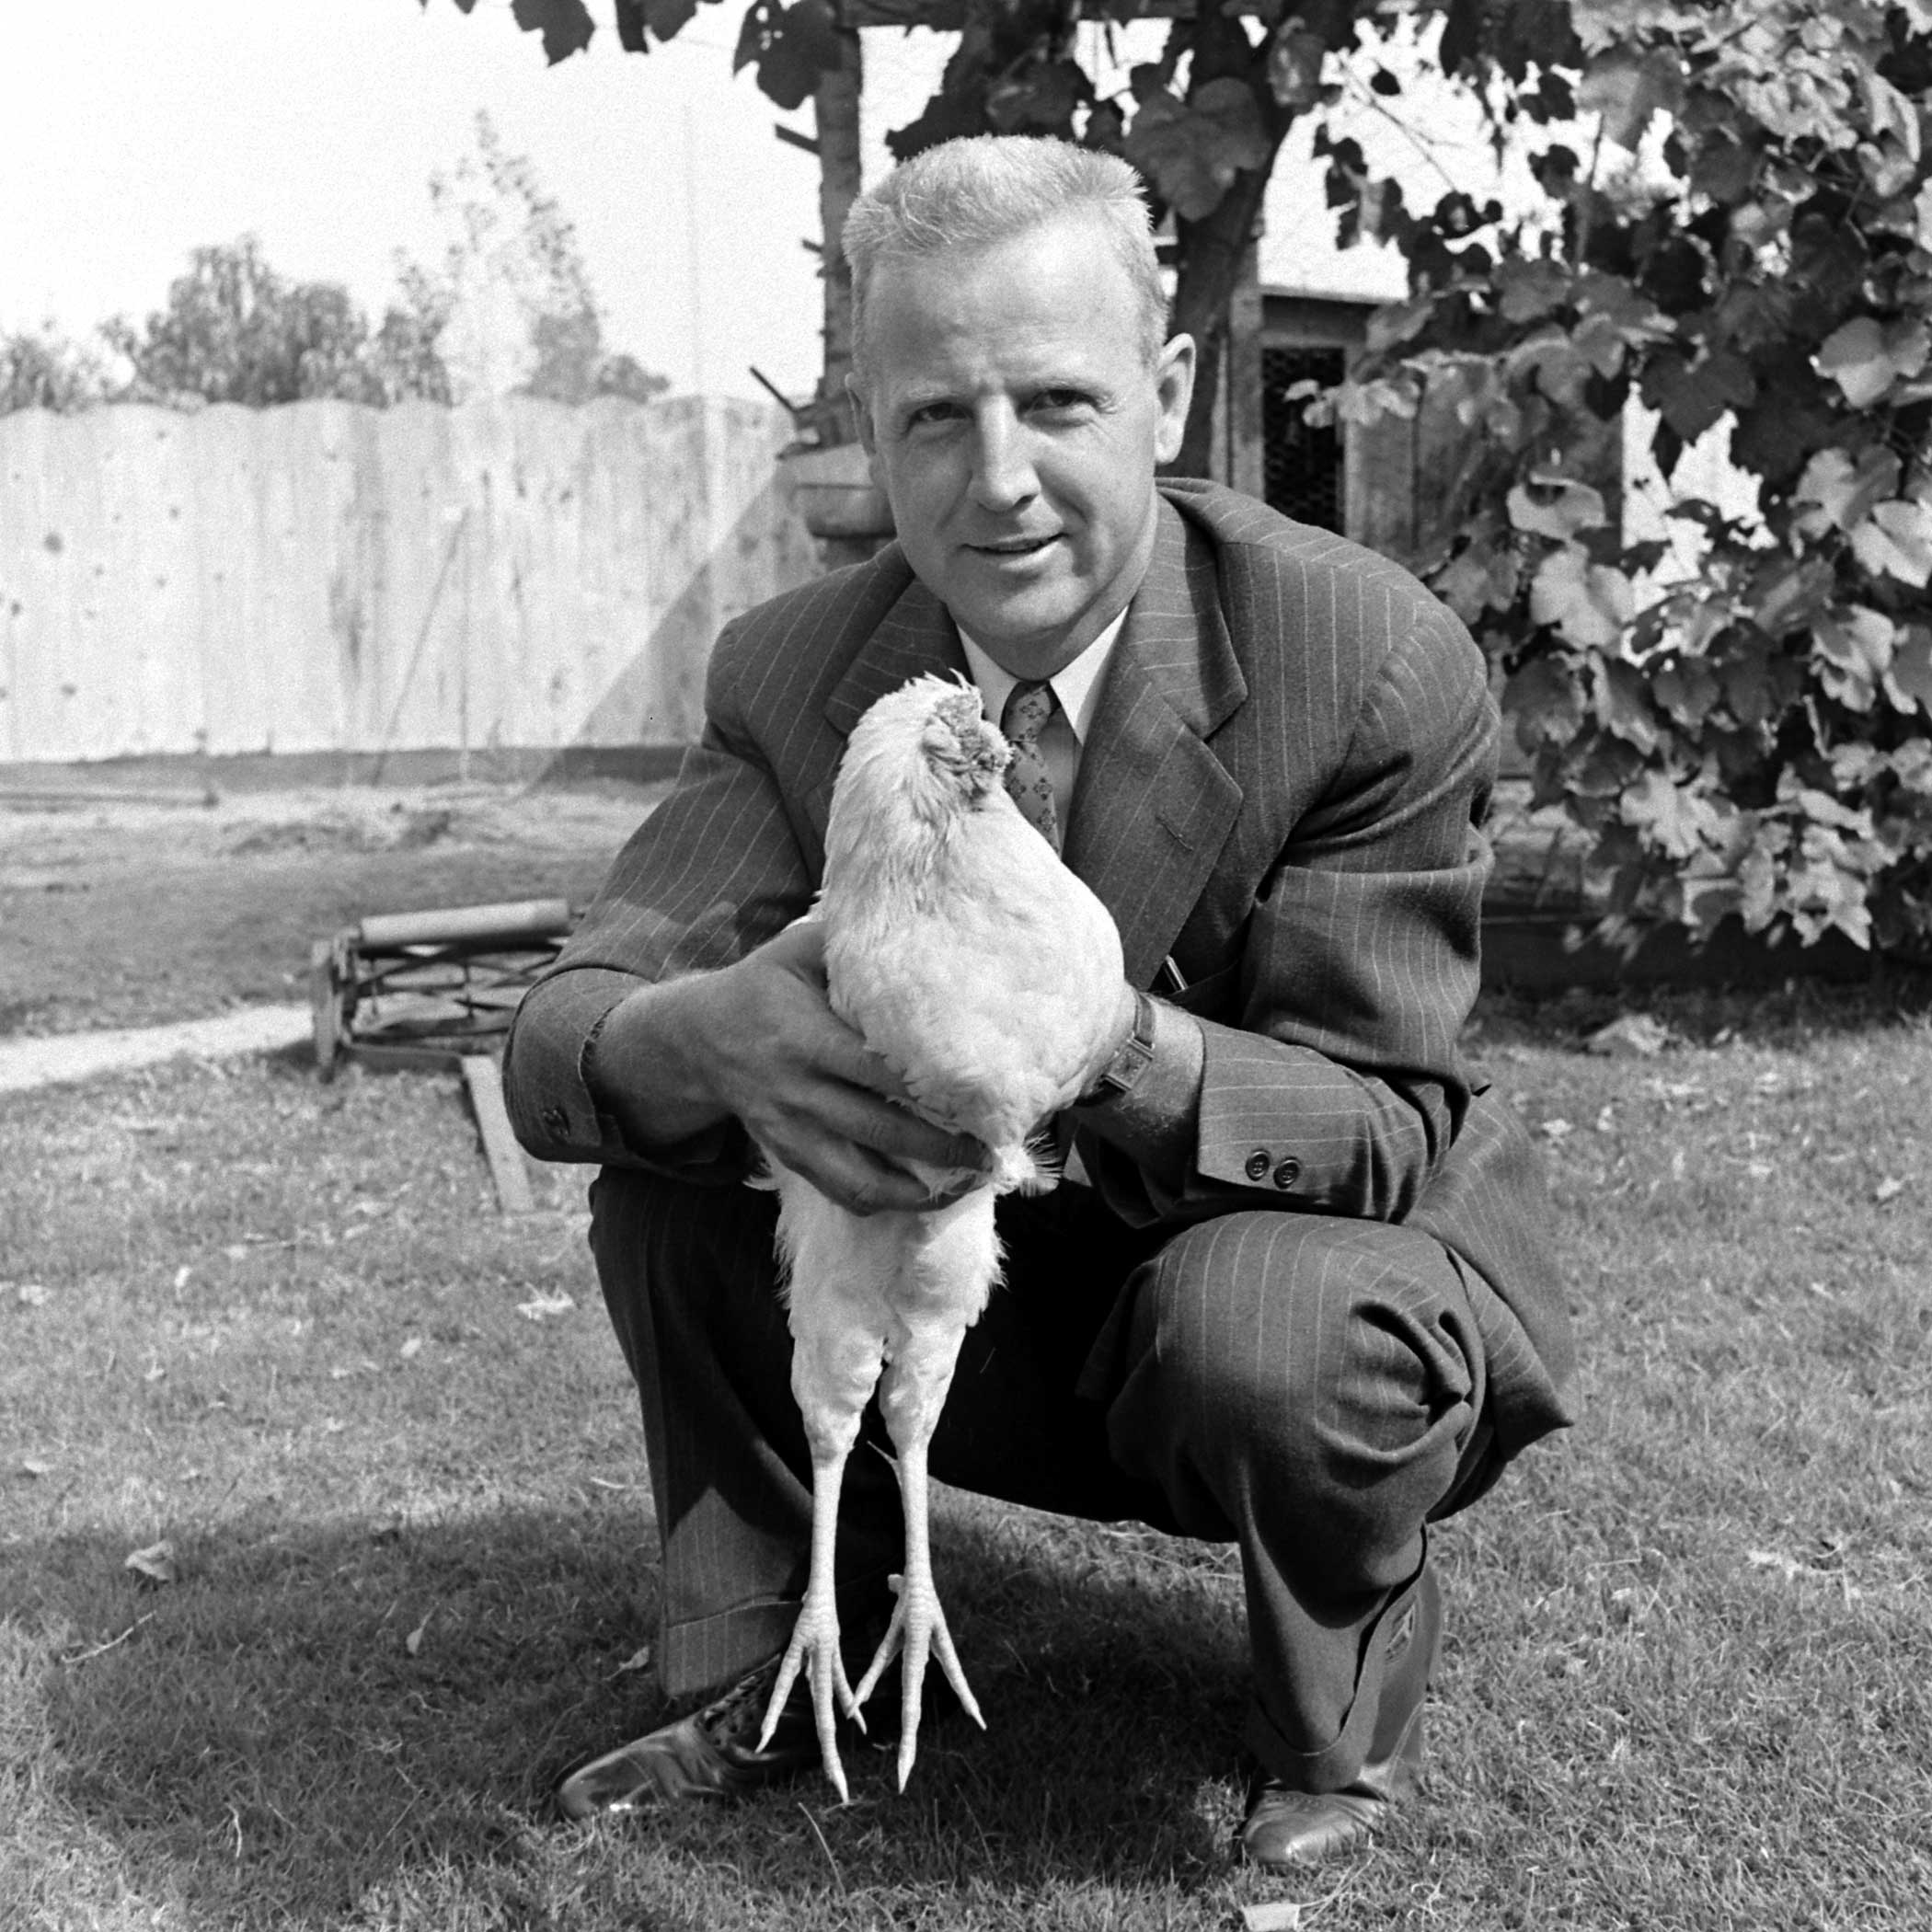 Hope Wade, a promoter who took Mike on the road and charged money for folks to take a look, holds Mike the headless chicken, Fruita, Colorado, 1945.